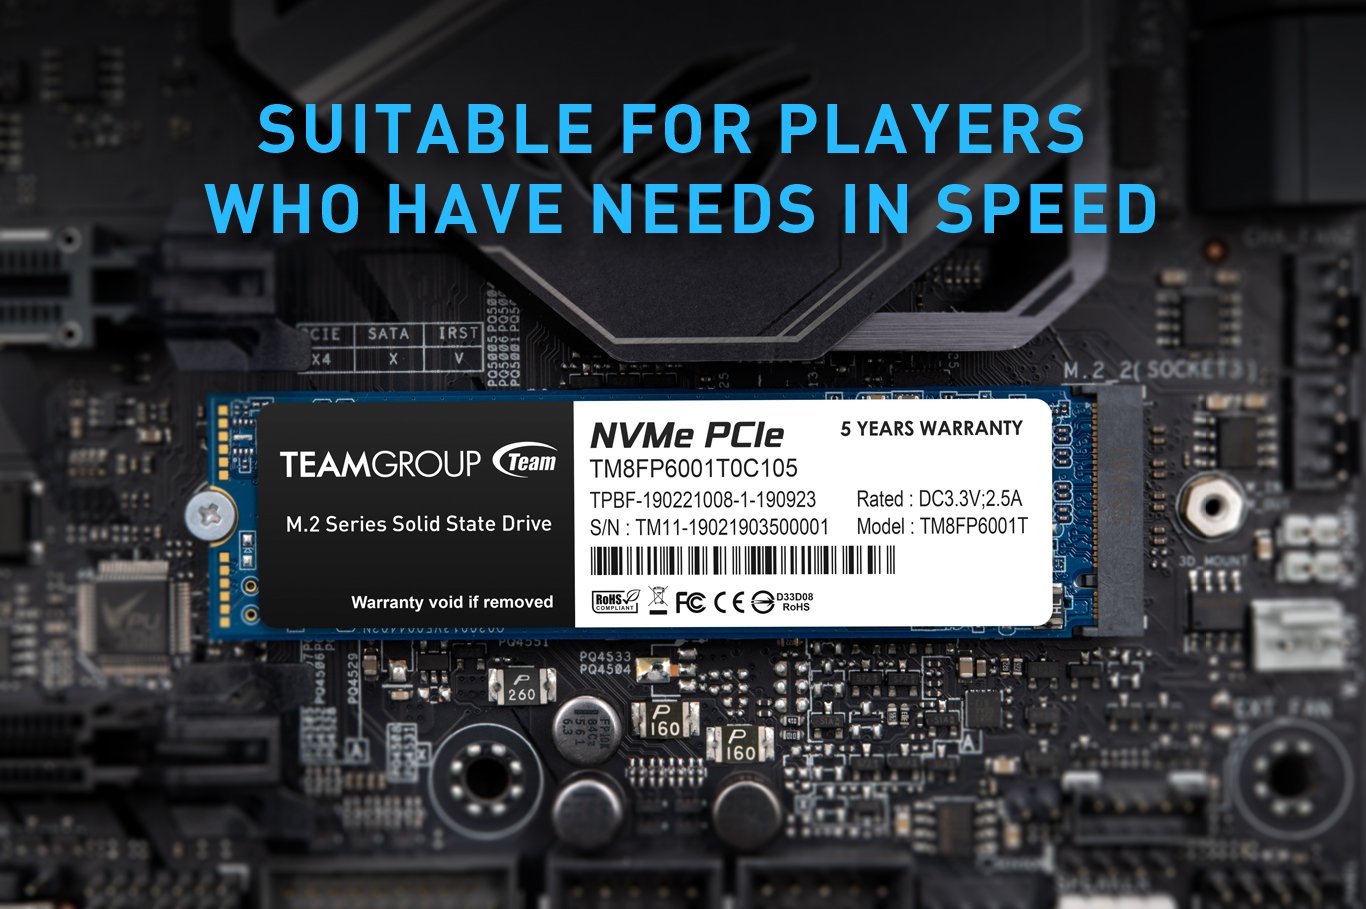 Teamgroup MP33 M.2 PCle SSD Face forward